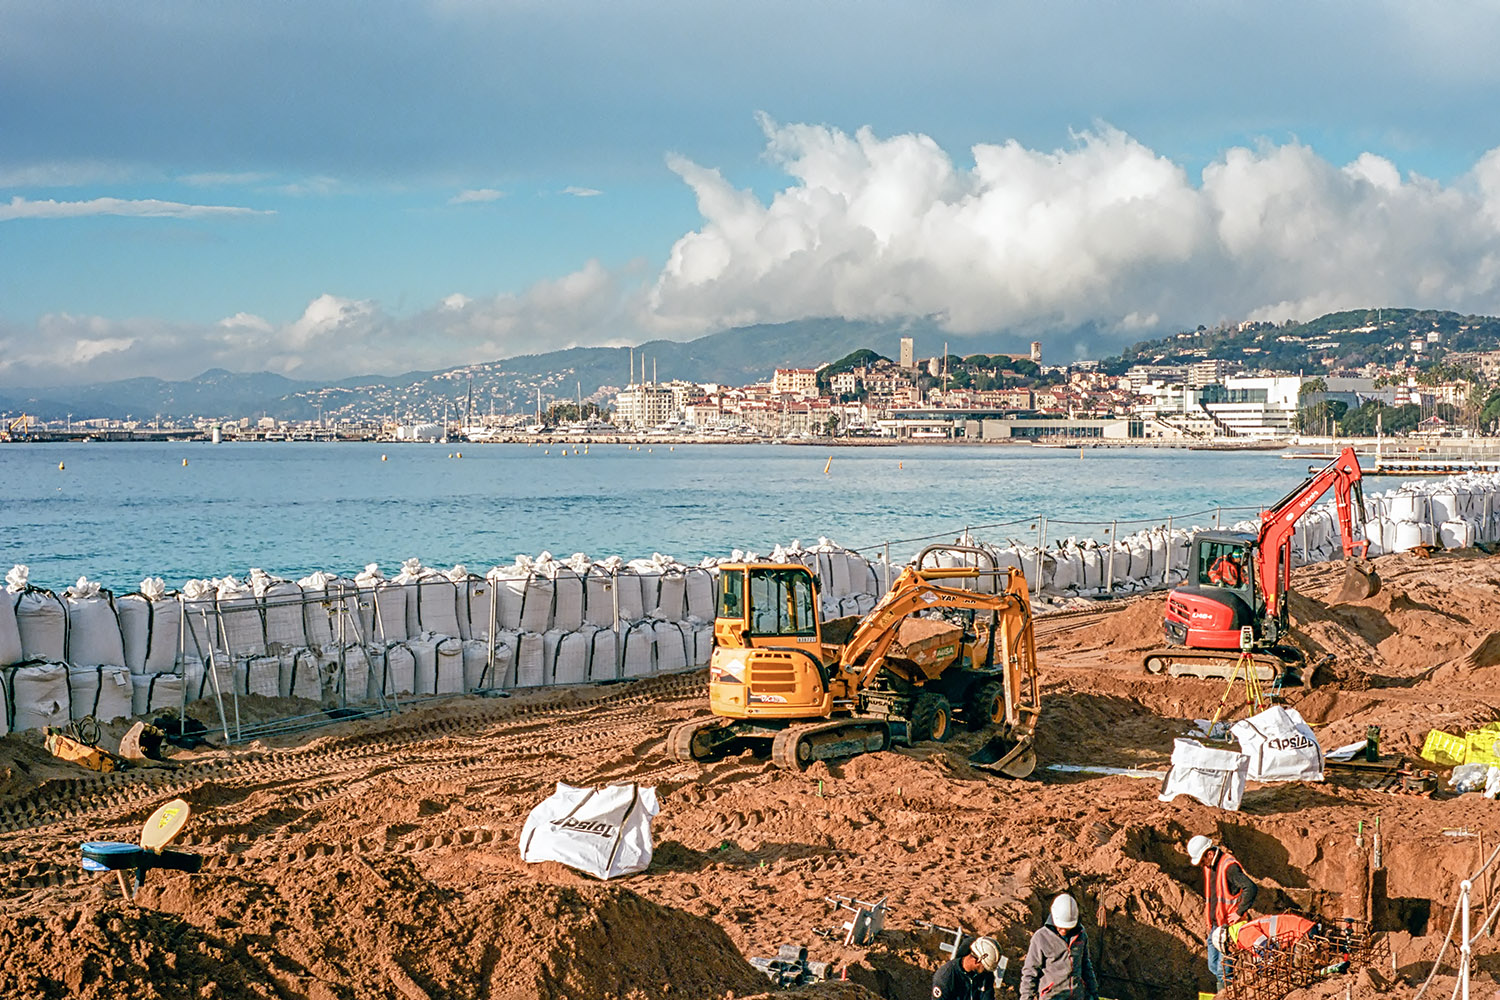 Cannes, widening the beach along the Croisette